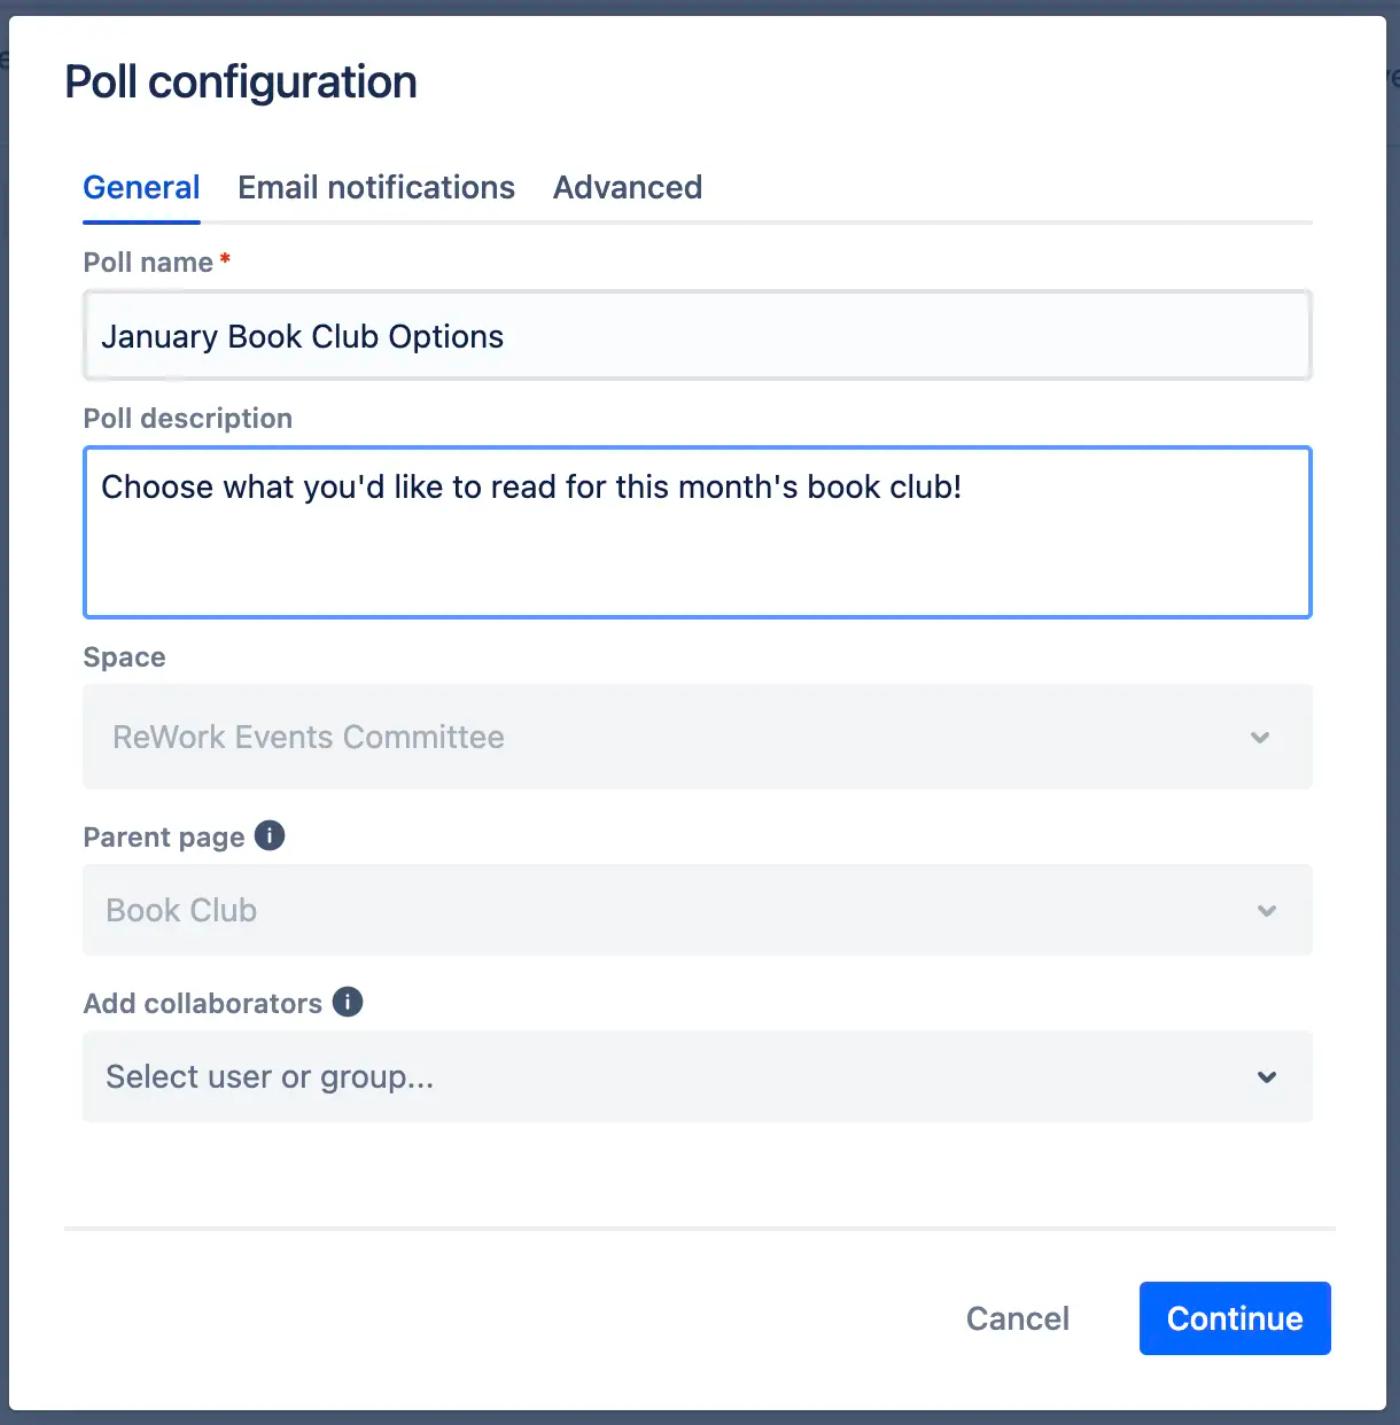 The Forms for Confluence poll configuration dialog with a title and description tailored for a book club